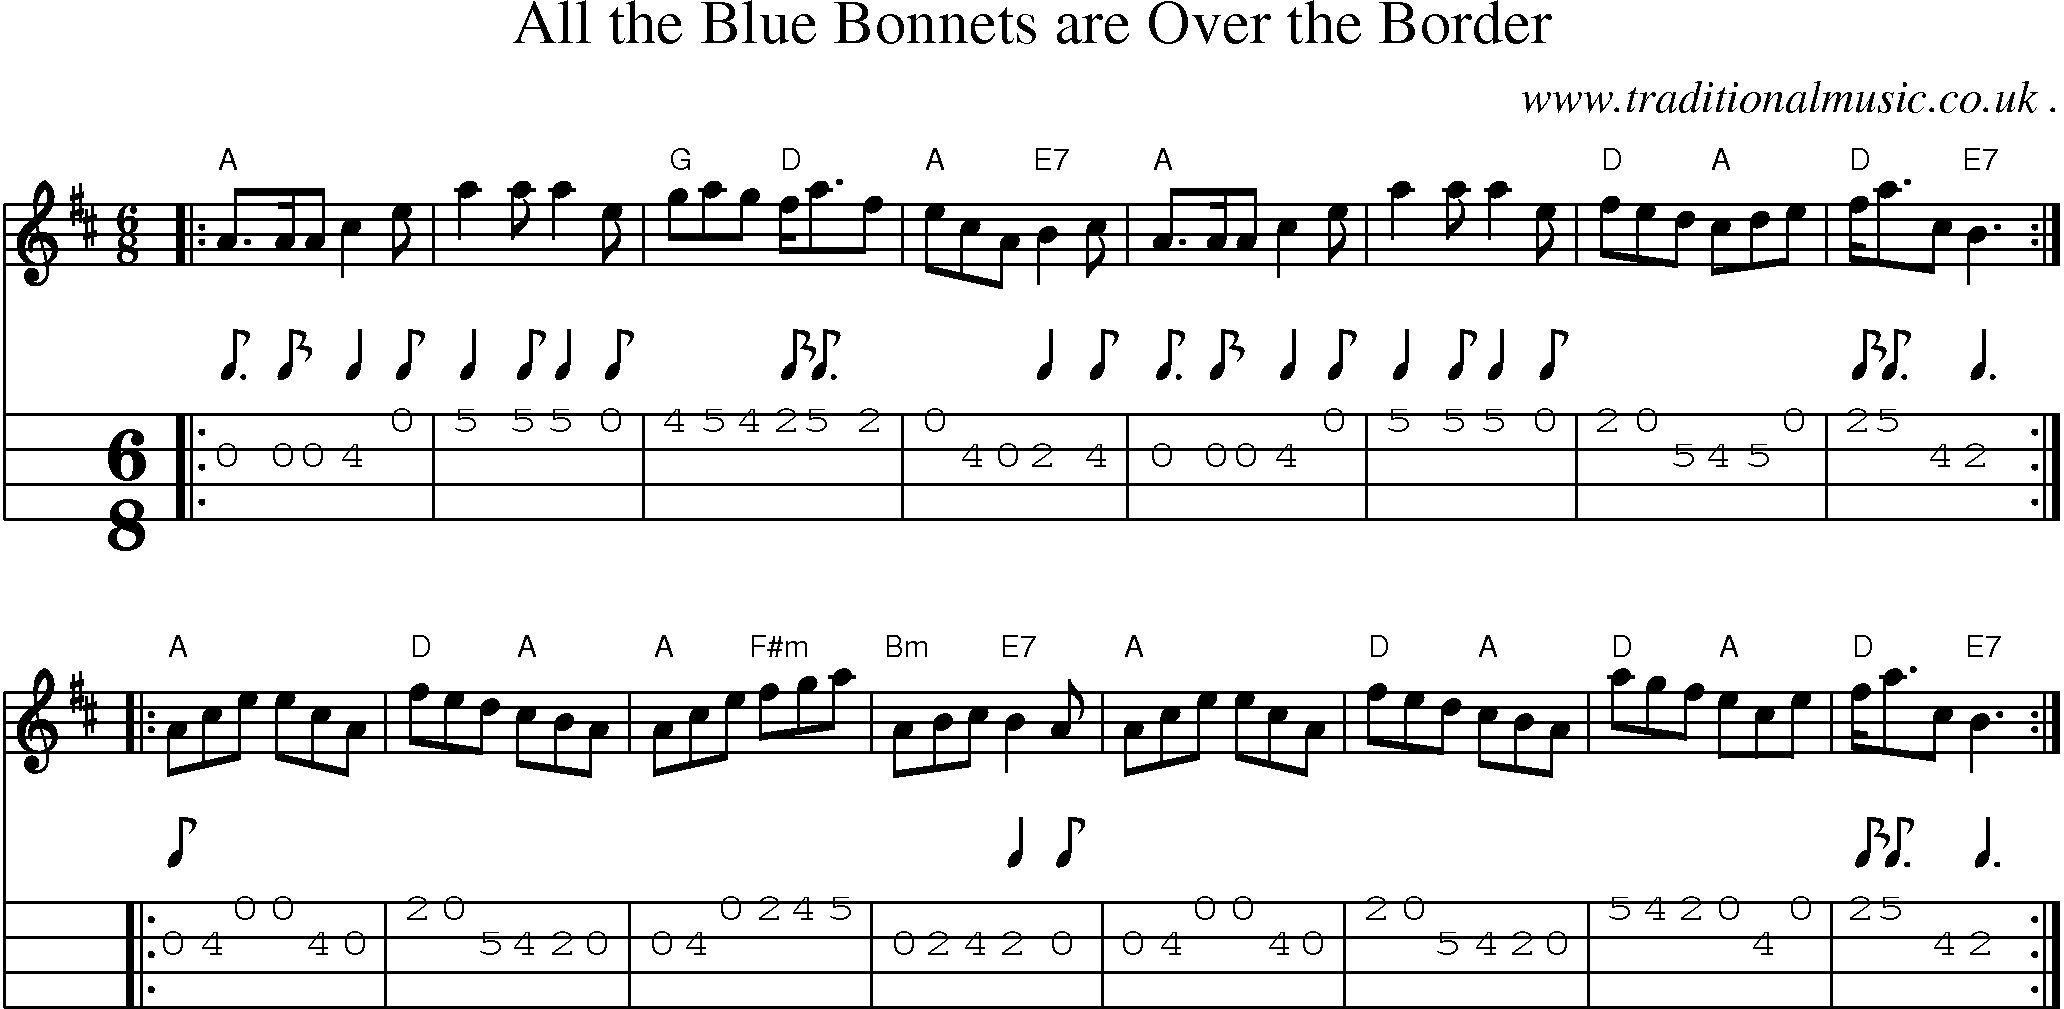 Sheet-music  score, Chords and Mandolin Tabs for All The Blue Bonnets Are Over The Border